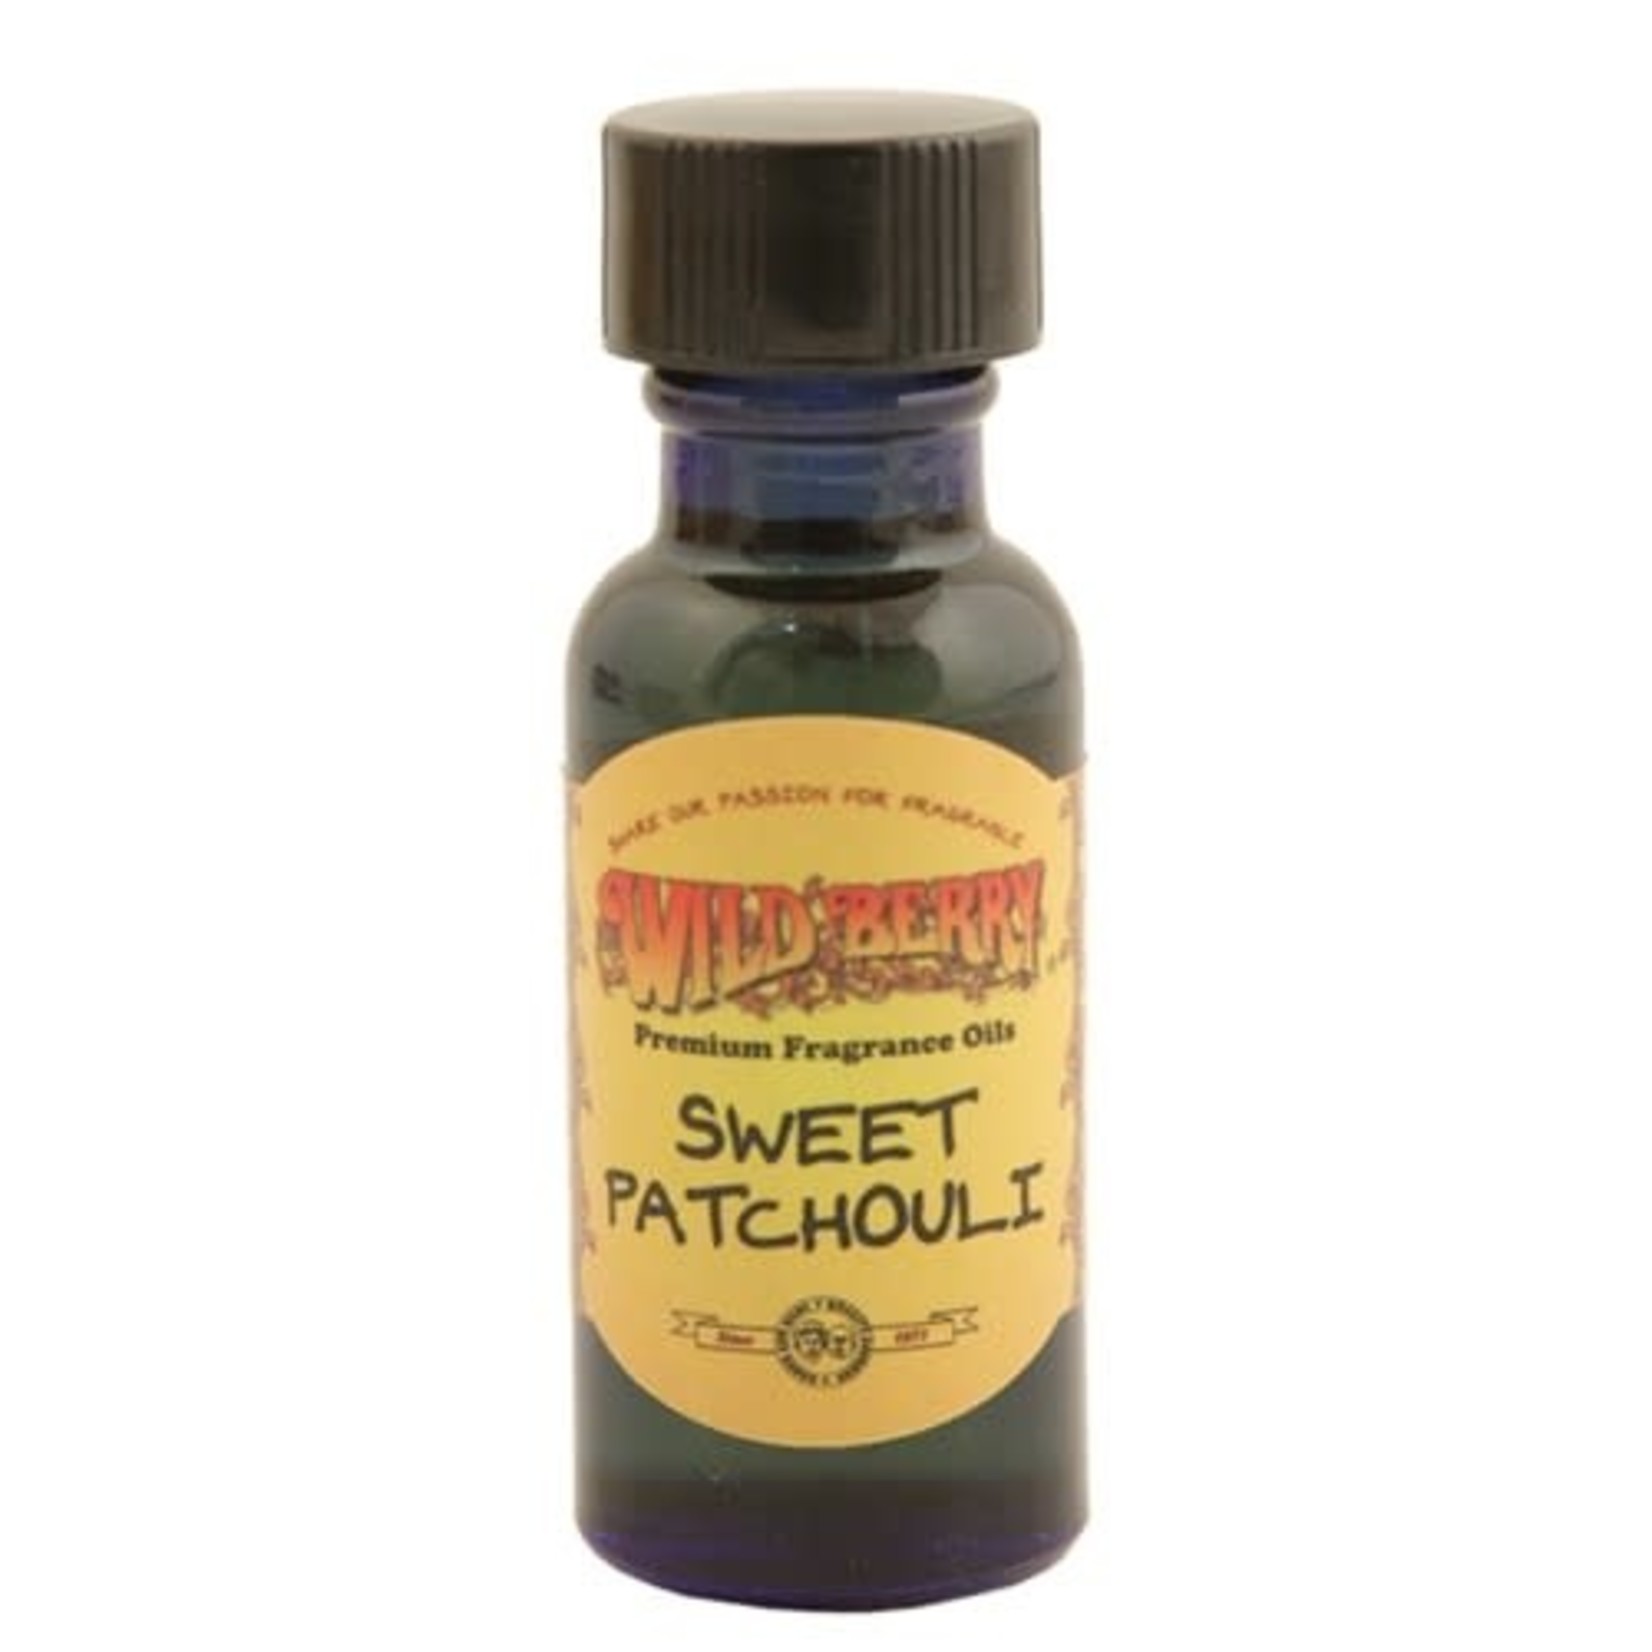 Sweet Patchouli Fragrance Oil Wild Berry